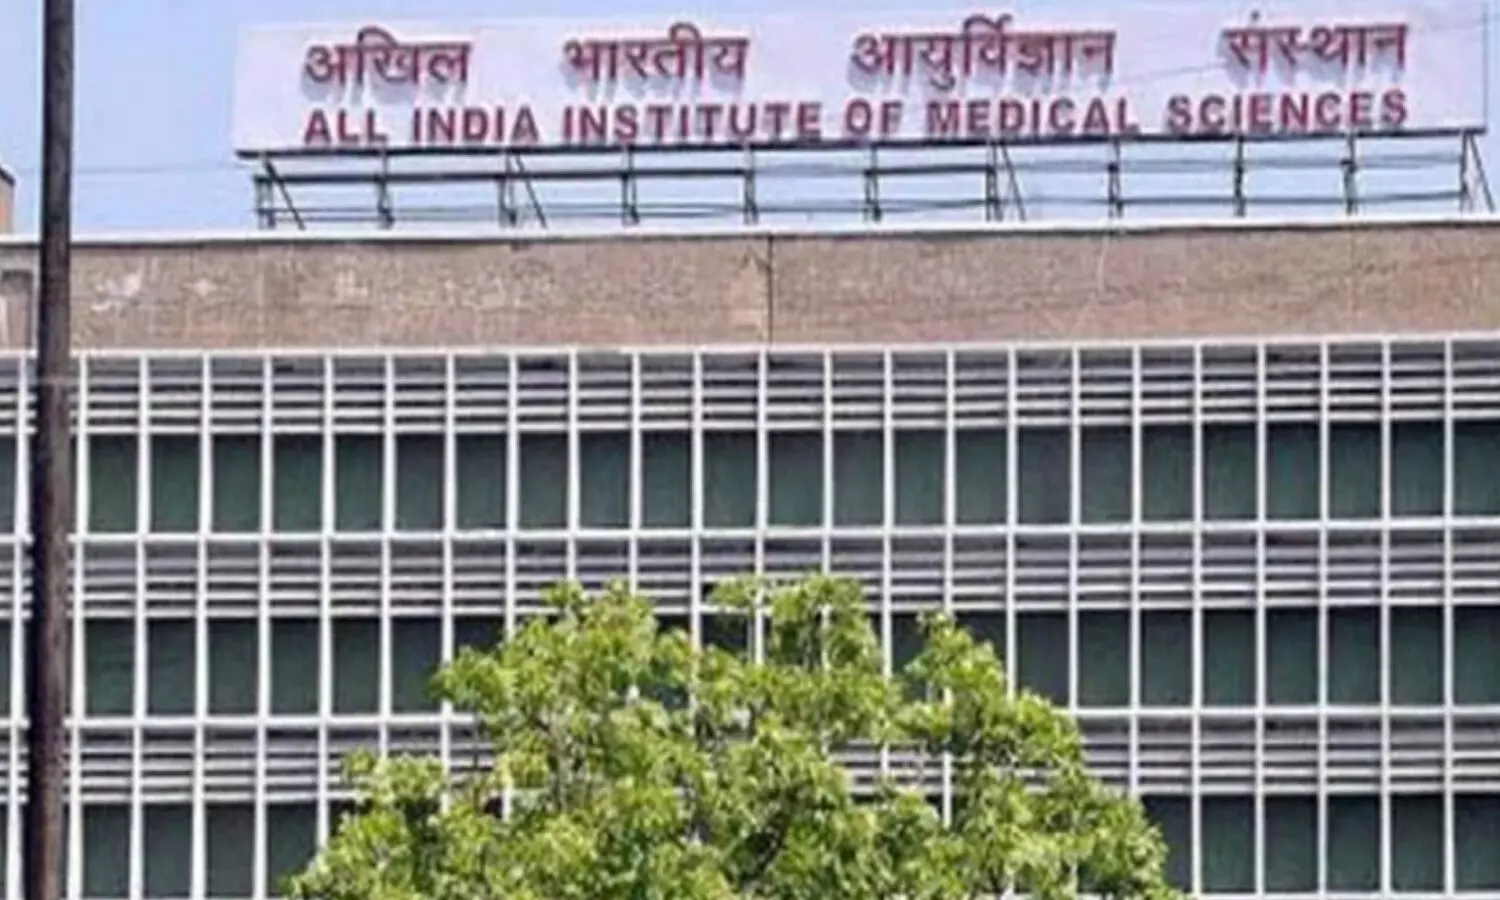 AIIMS sets up task force to develop COVID-19 management protocol